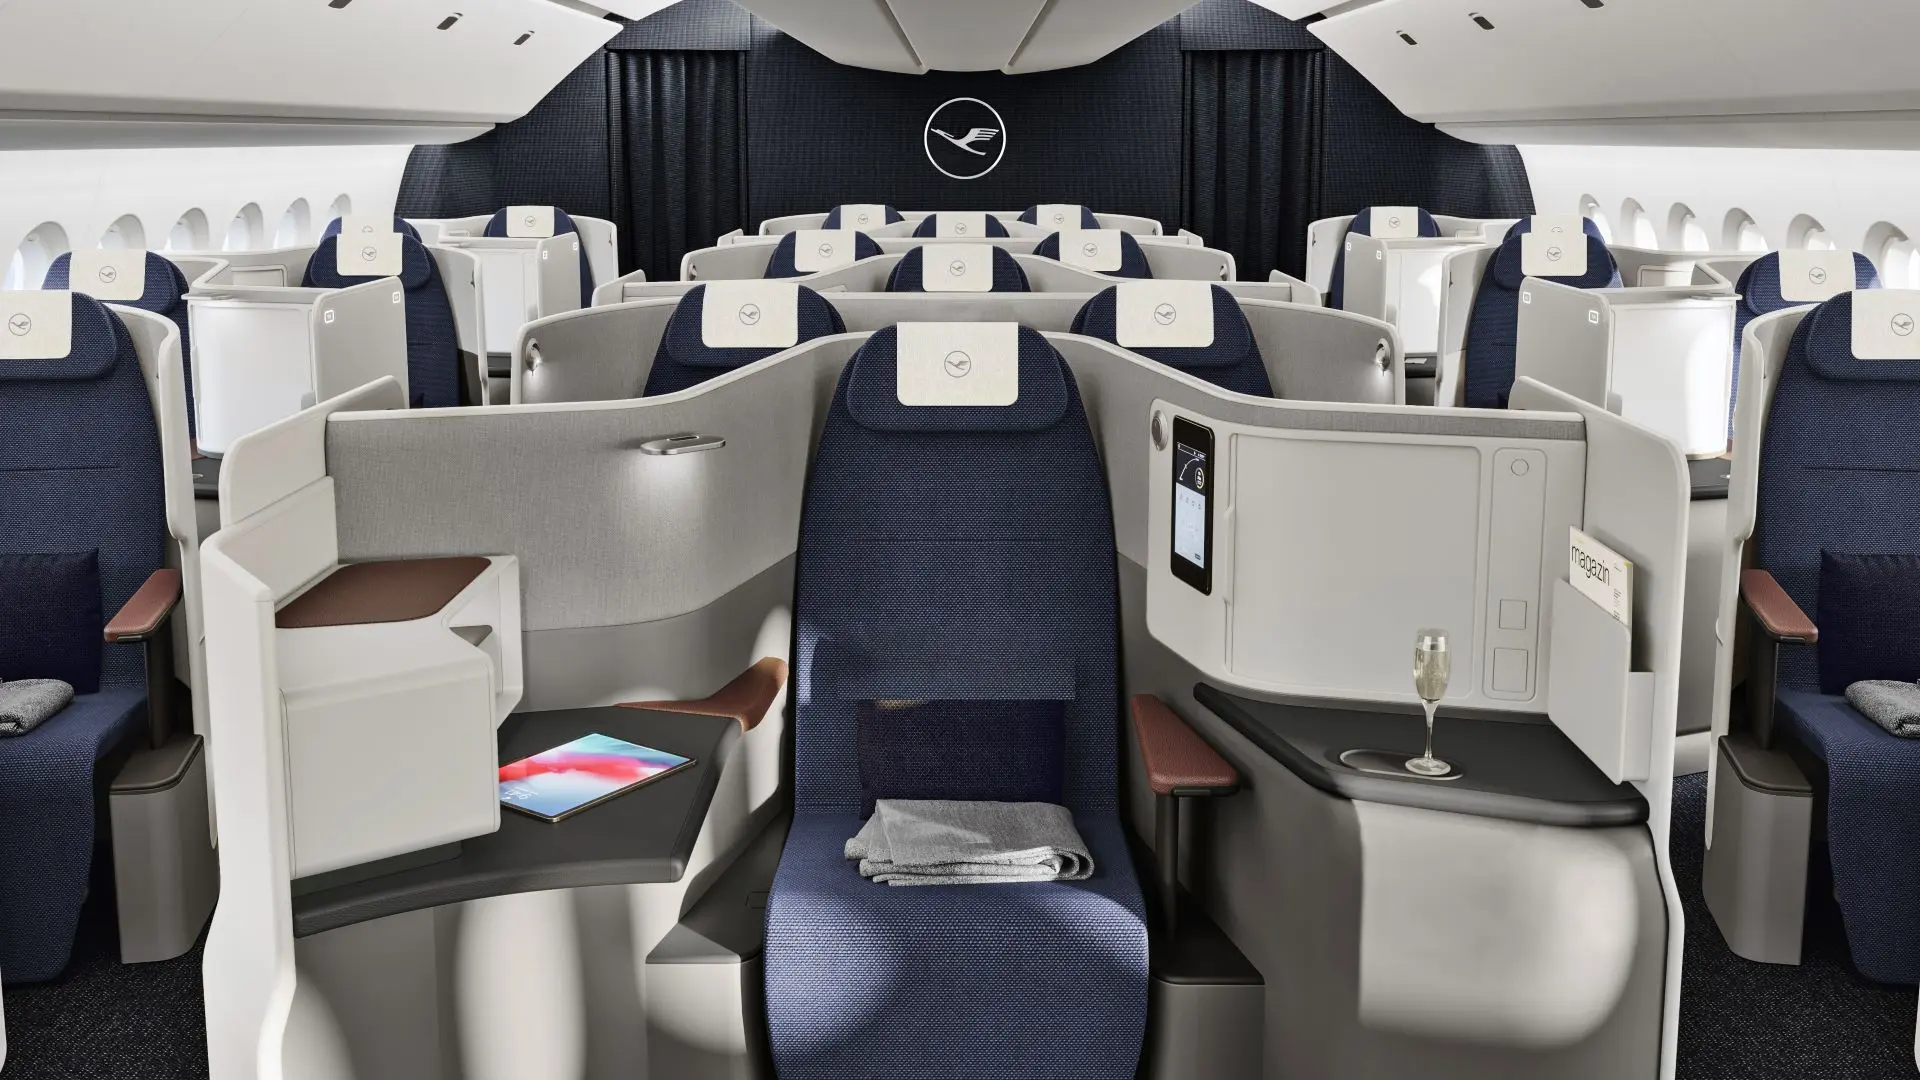 Airlines News - SWISS - new First and Business Class cabins for 2025